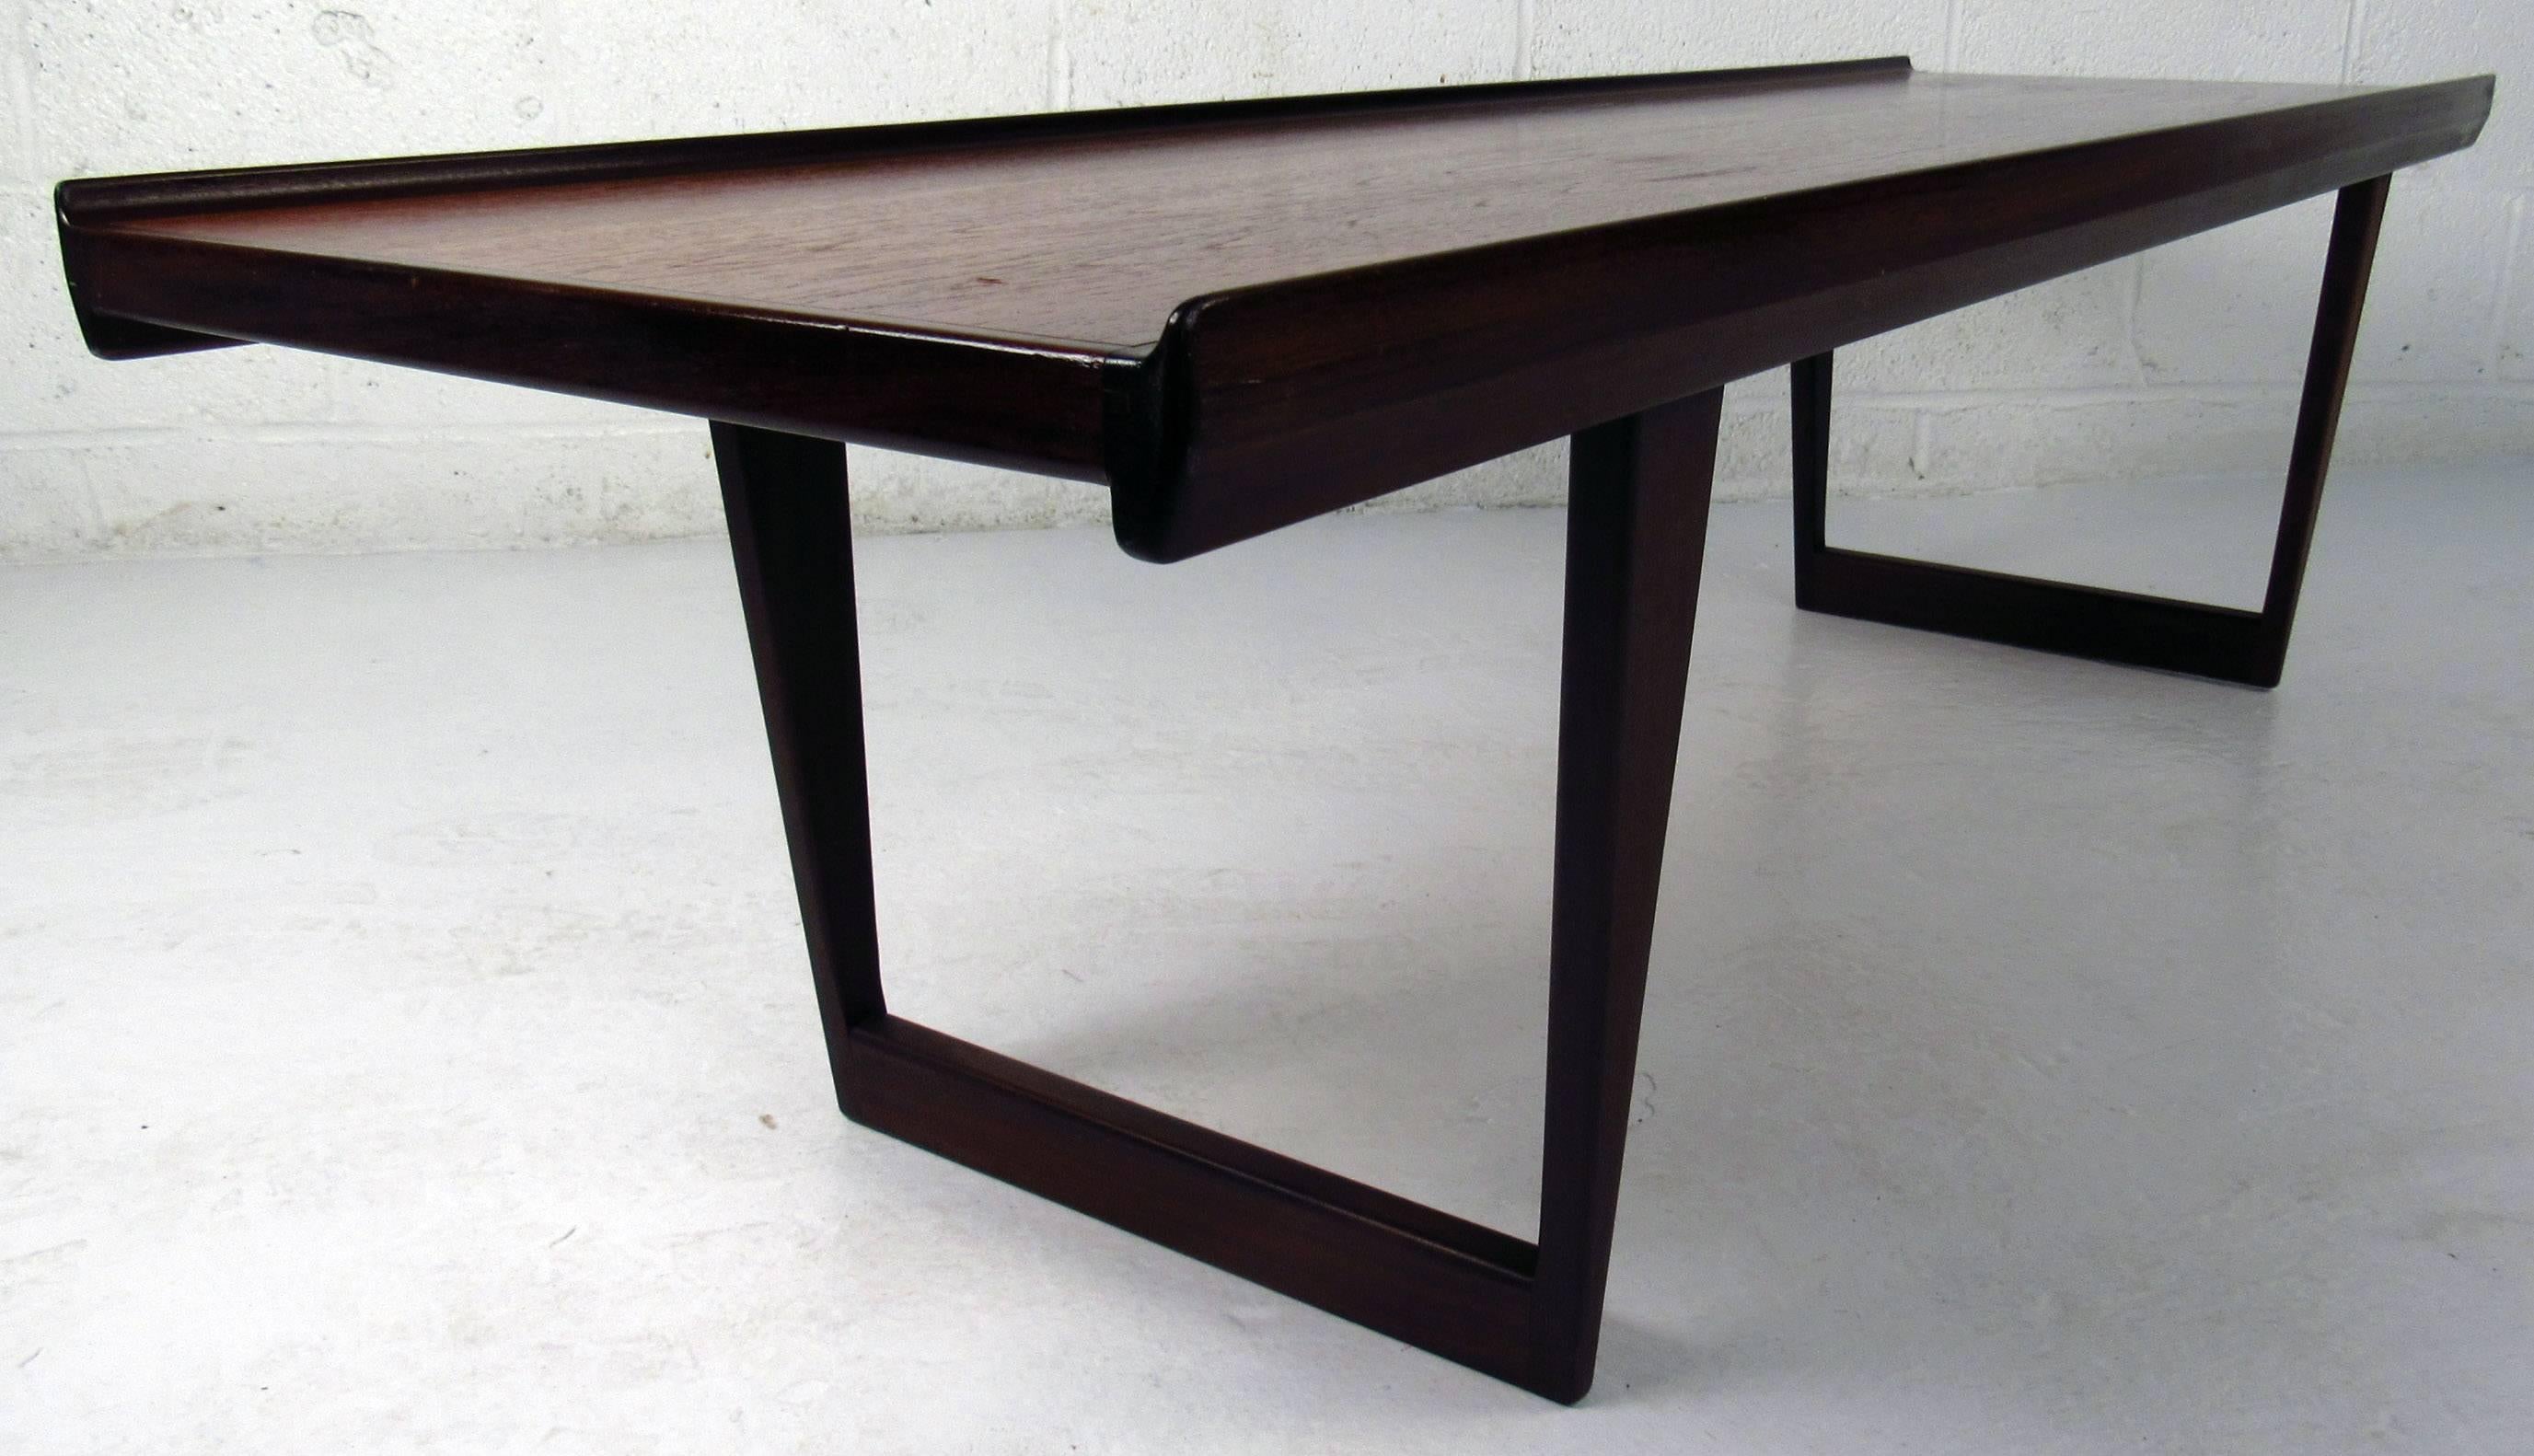 Vintage-modern teak coffee table with raised lip along both sides, sculpted sled legs and beautiful wood grain. Perfect cocktail table showcases quality mid-century construction from Scandinavia. 

Please confirm item location NY or NJ with dealer.